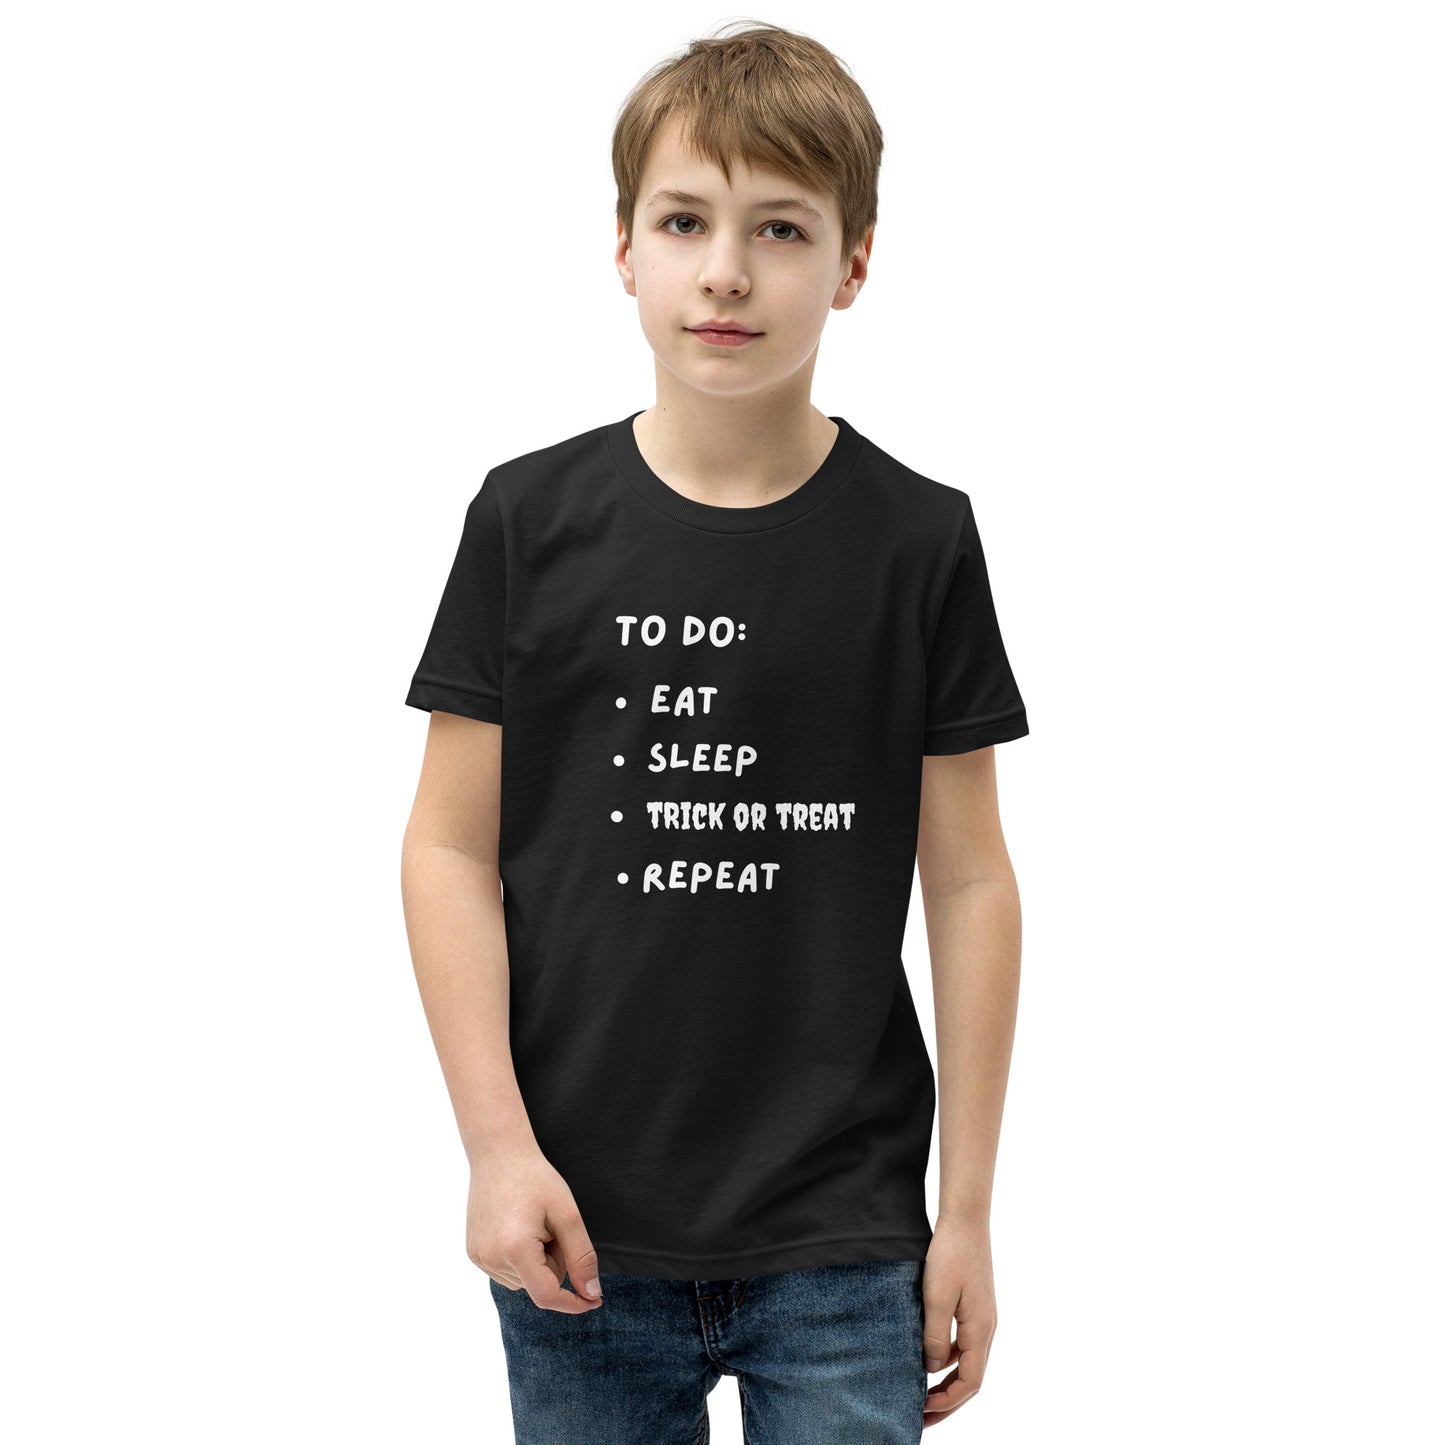 To-do List Youth Halloween T-shirt